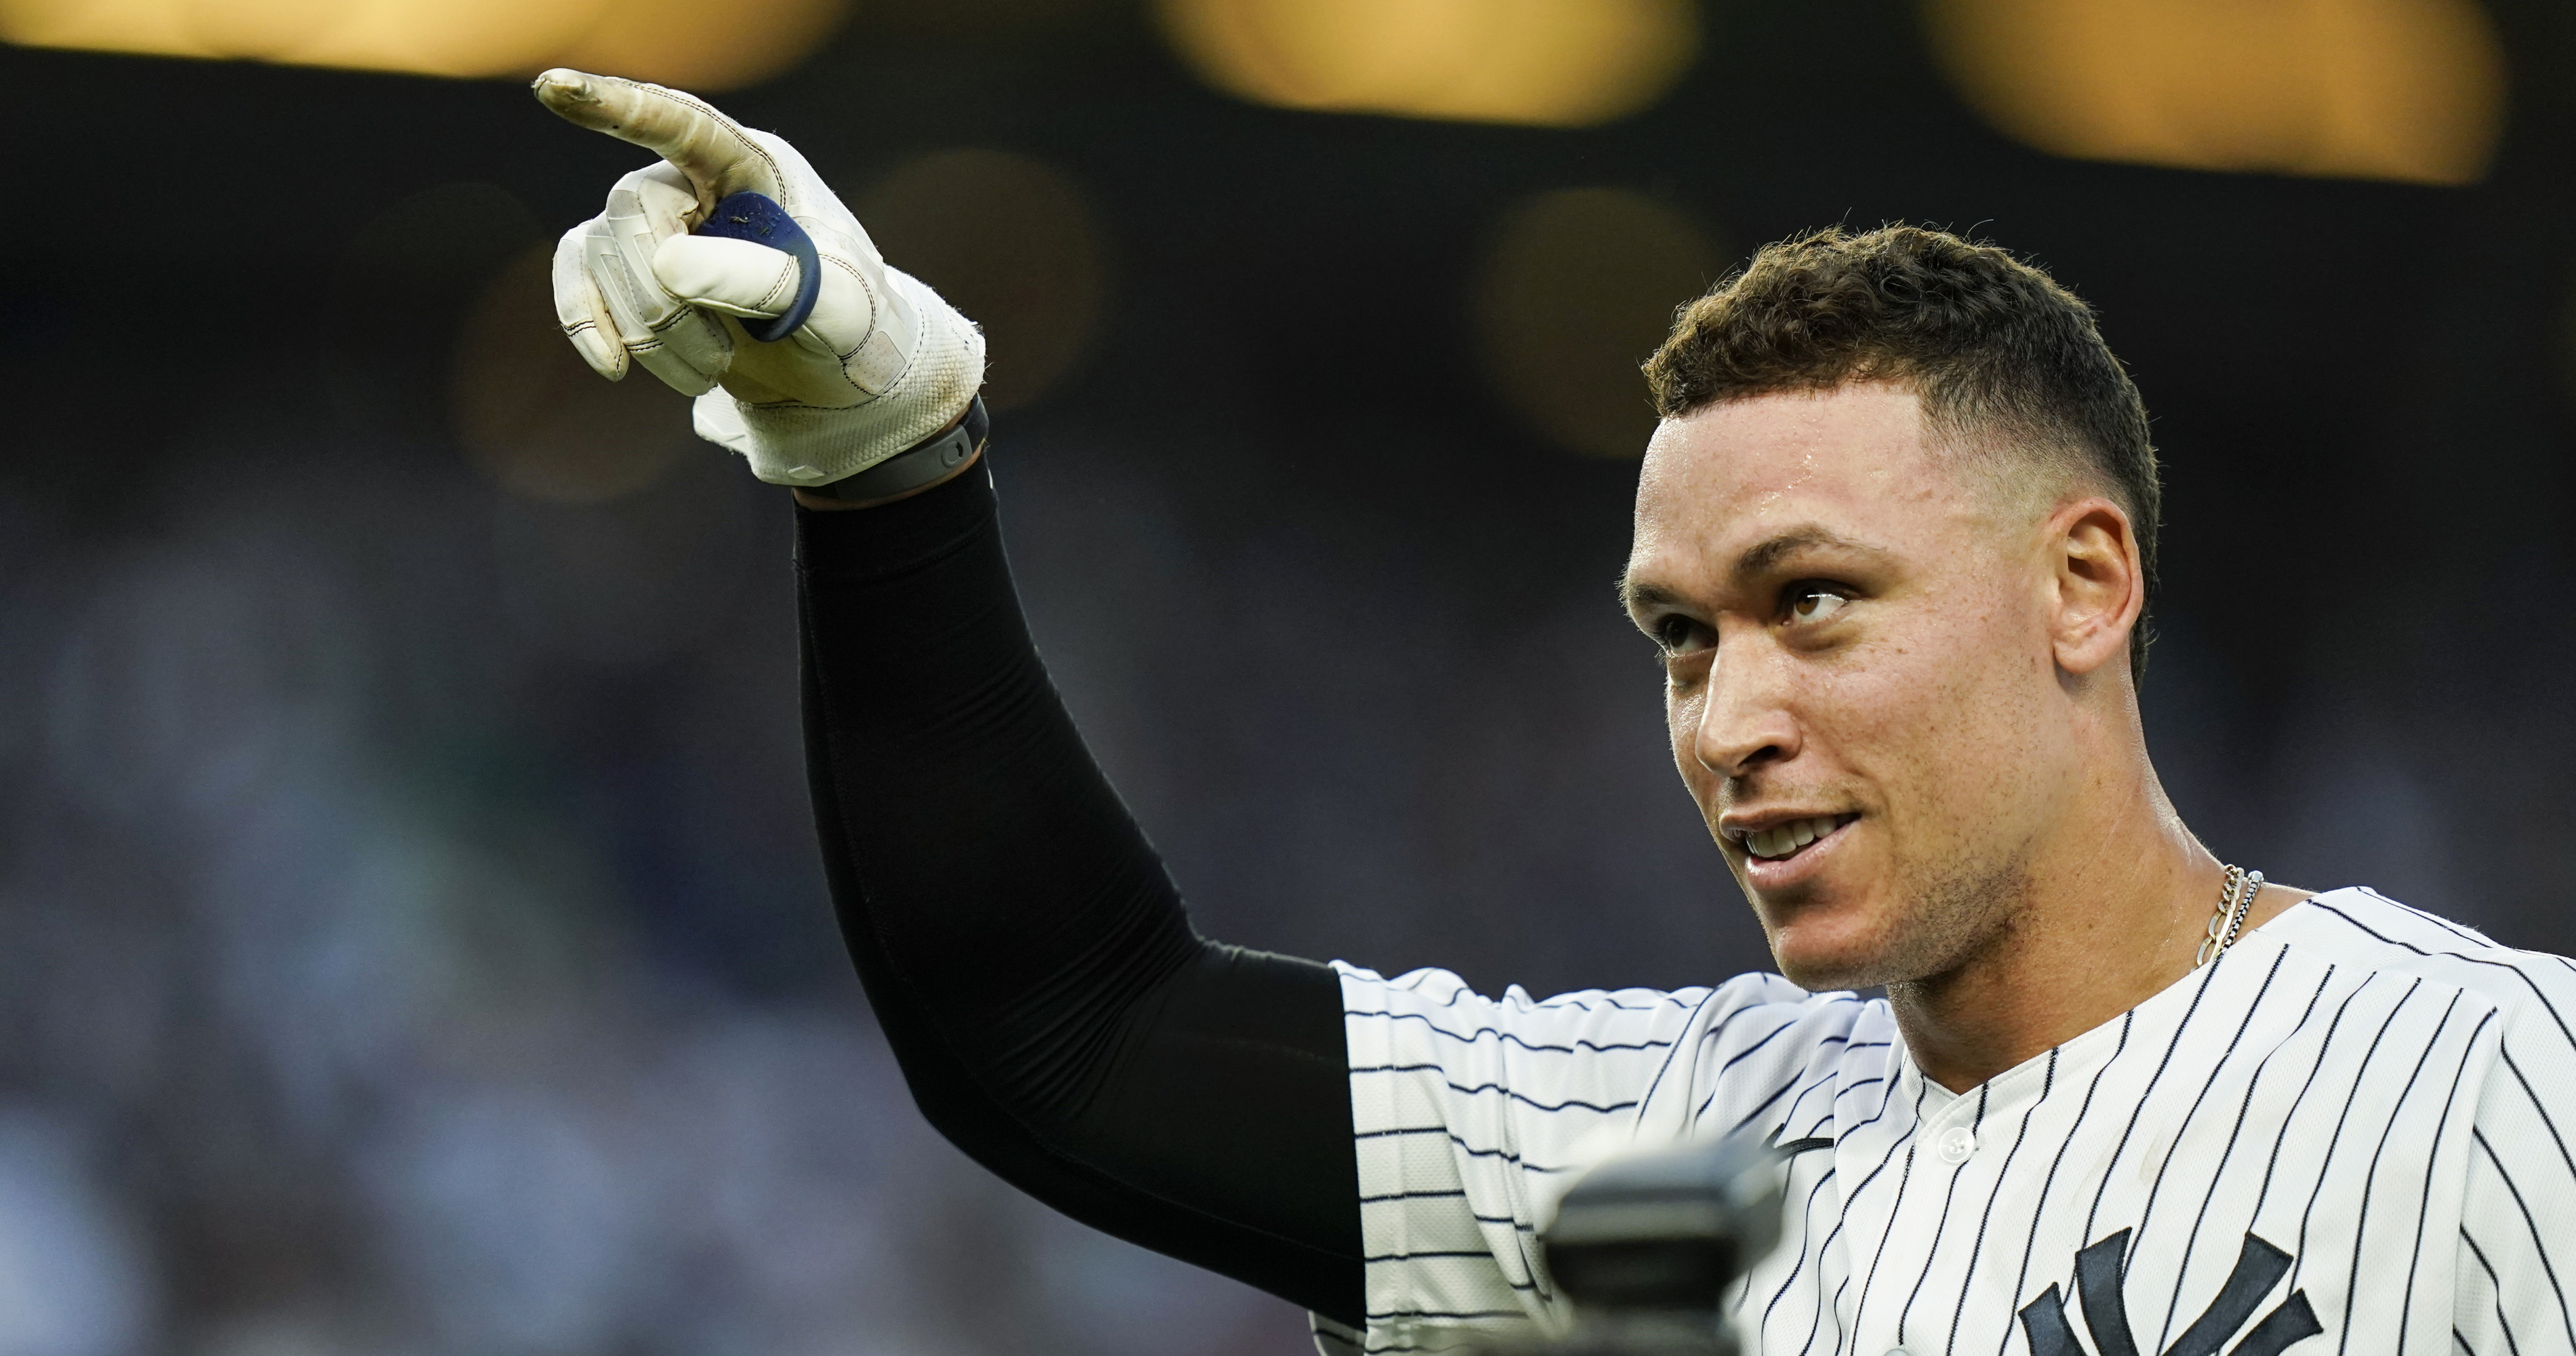 Hoch] Aaron Judge: “Very few people get this opportunity to talk extension.  Me getting this opportunity is something special and I appreciate the  Yankees wanting to do that. But I don't mind